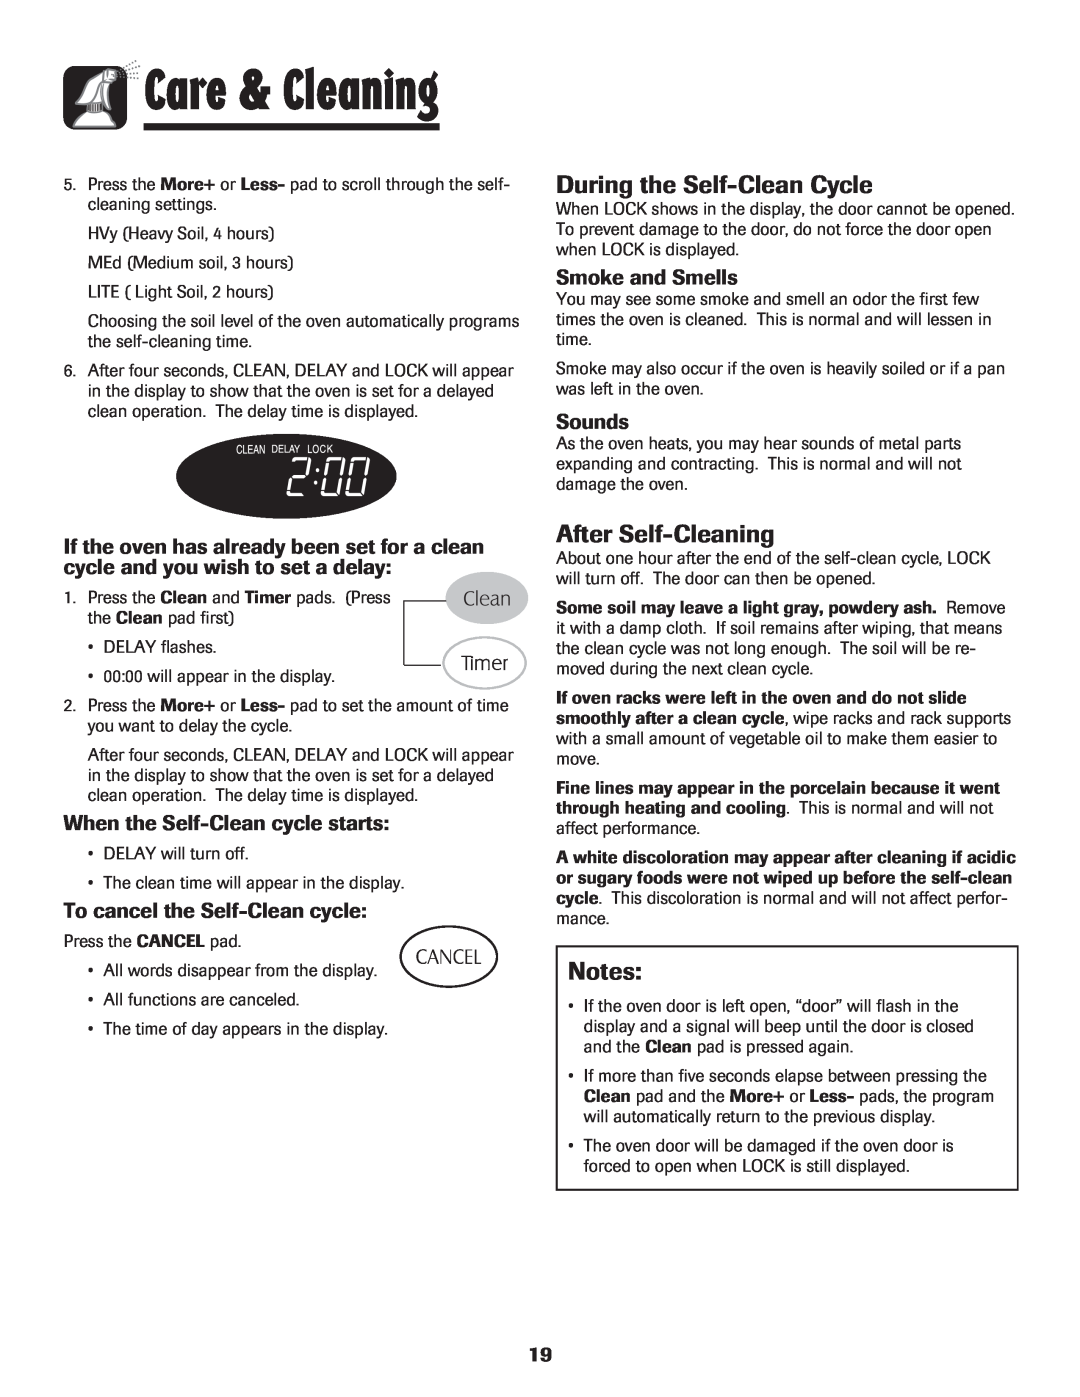 Maytag MGR5775QDW manual During the Self-Clean Cycle, After Self-Cleaning, Smoke and Smells, Sounds, Care & Cleaning 